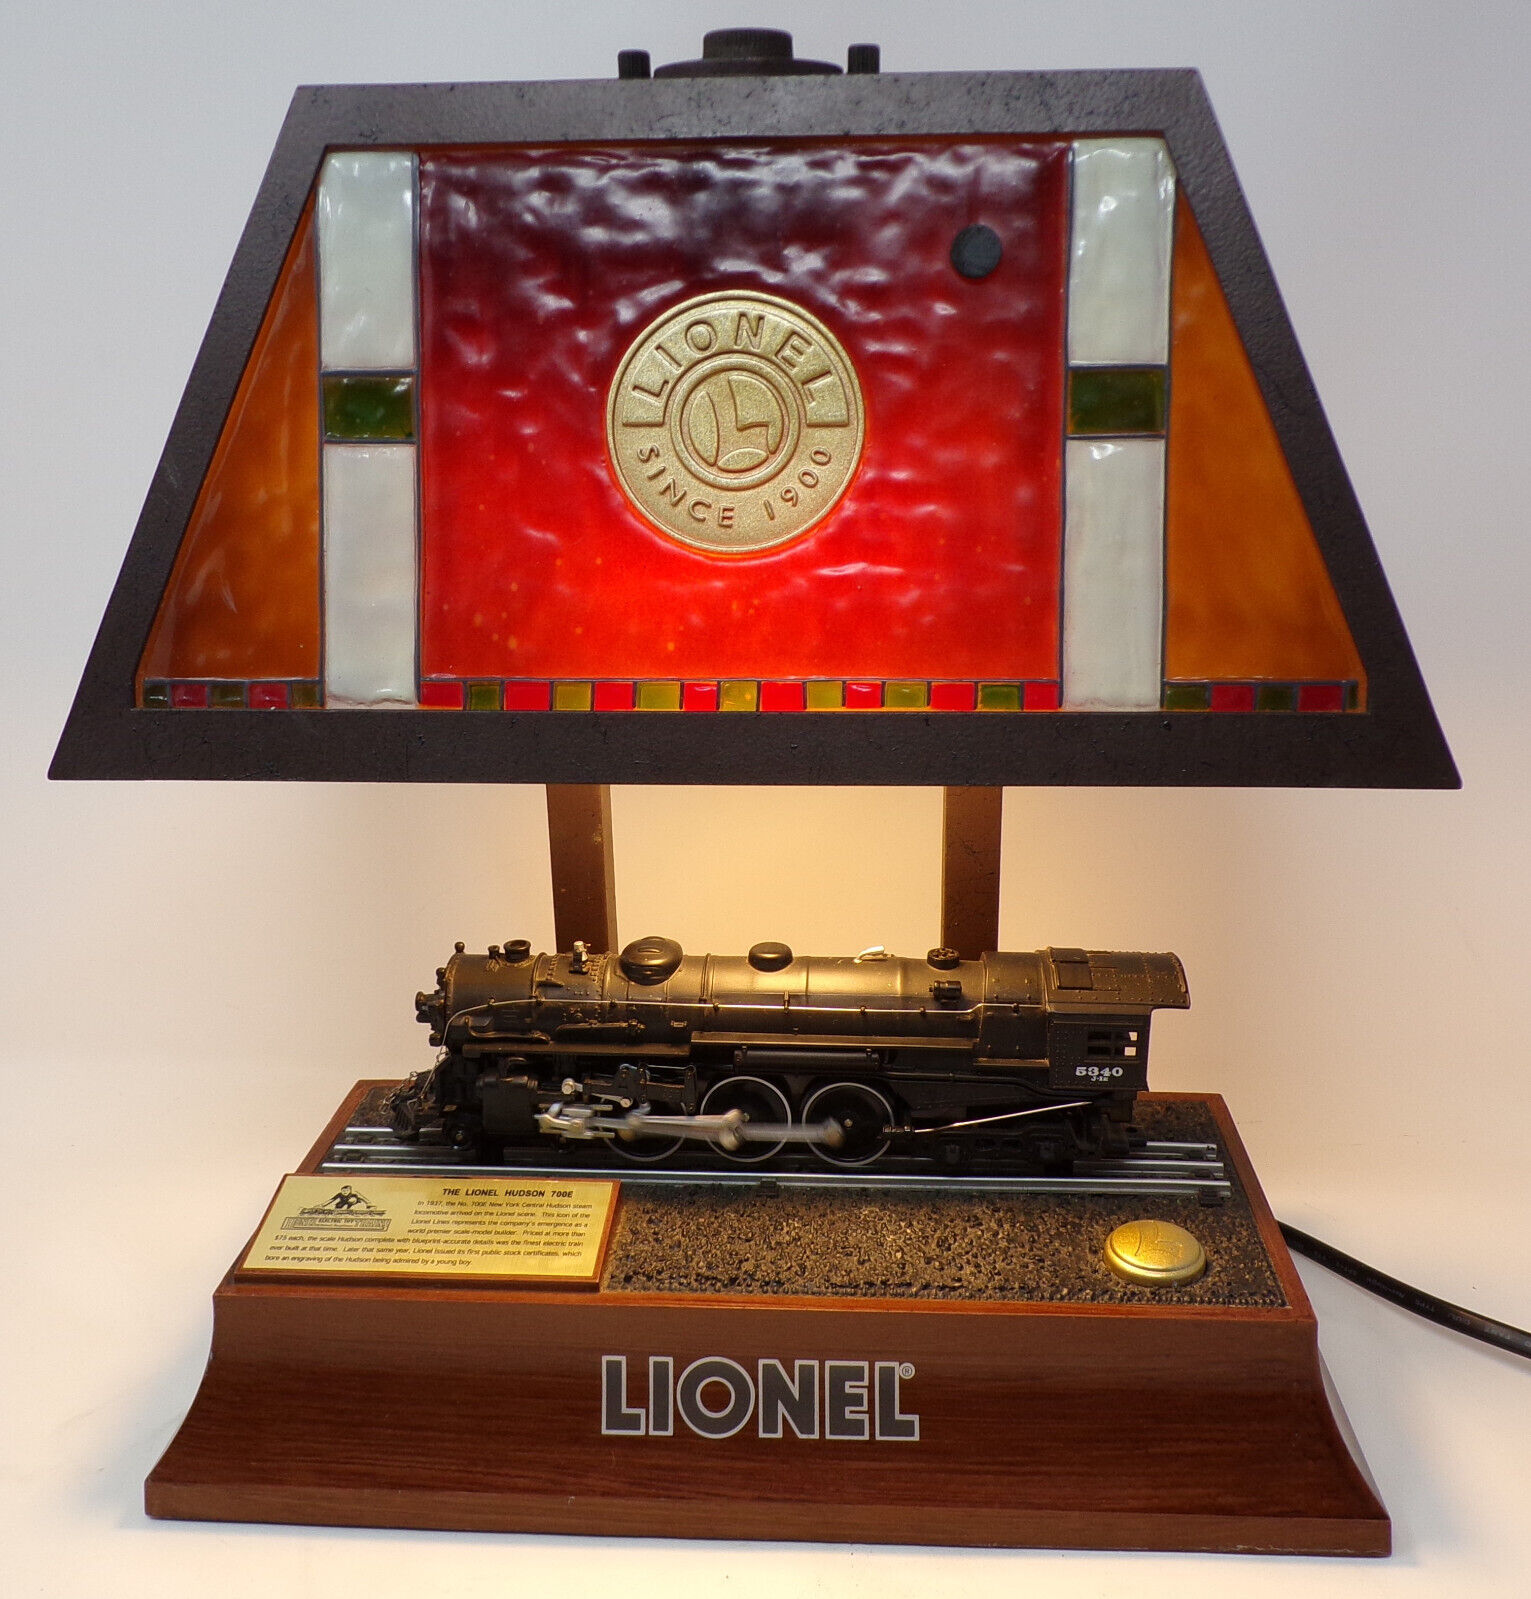 The Lionel Hudson 700E Animated Moving Train Lamp with Sound